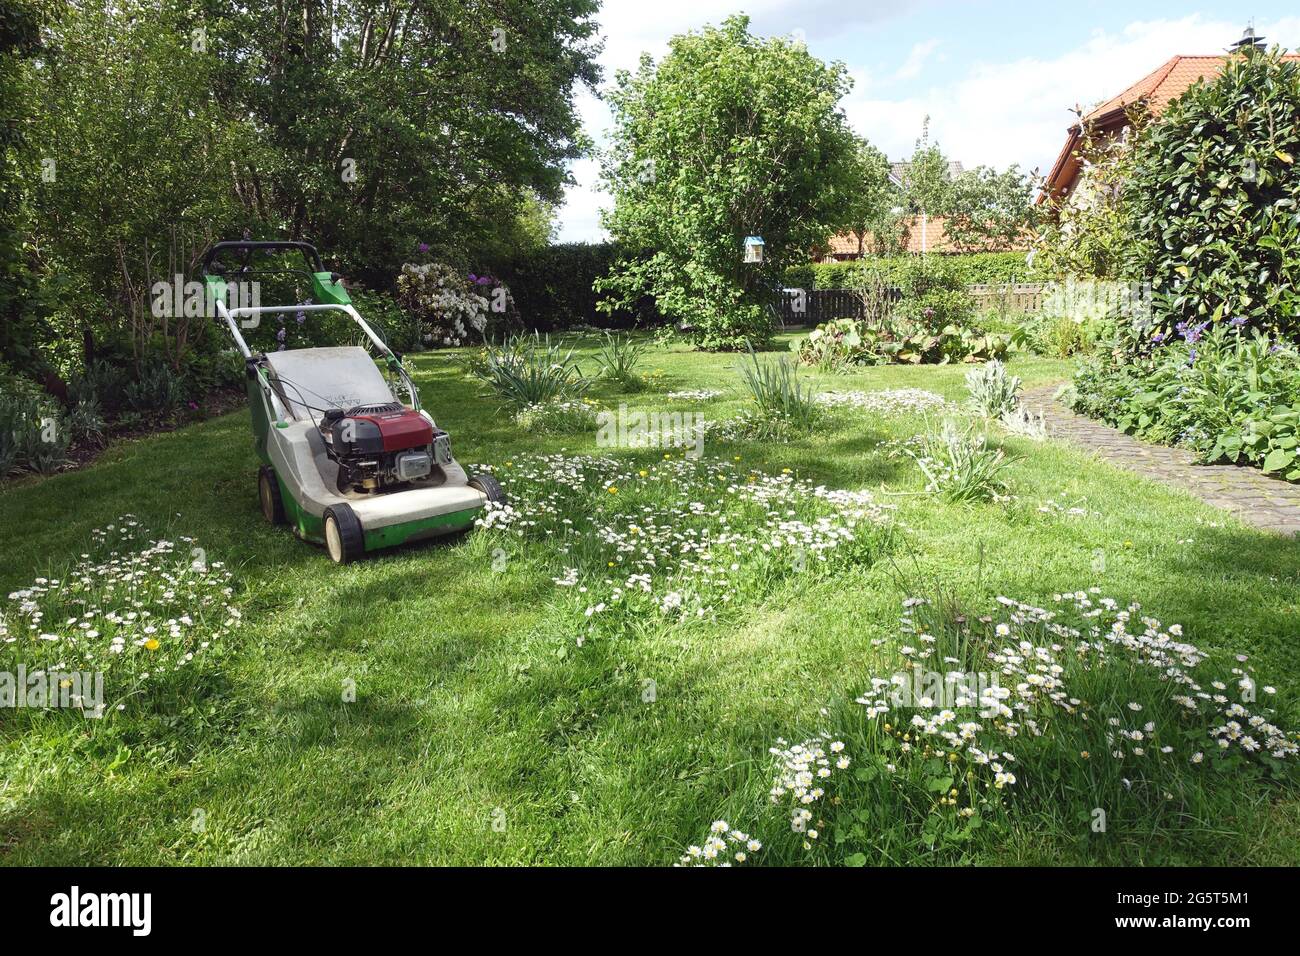 common daisy, lawn daisy, English daisy (Bellis perennis), lawn mower on a meadow with daisies , Germany Stock Photo